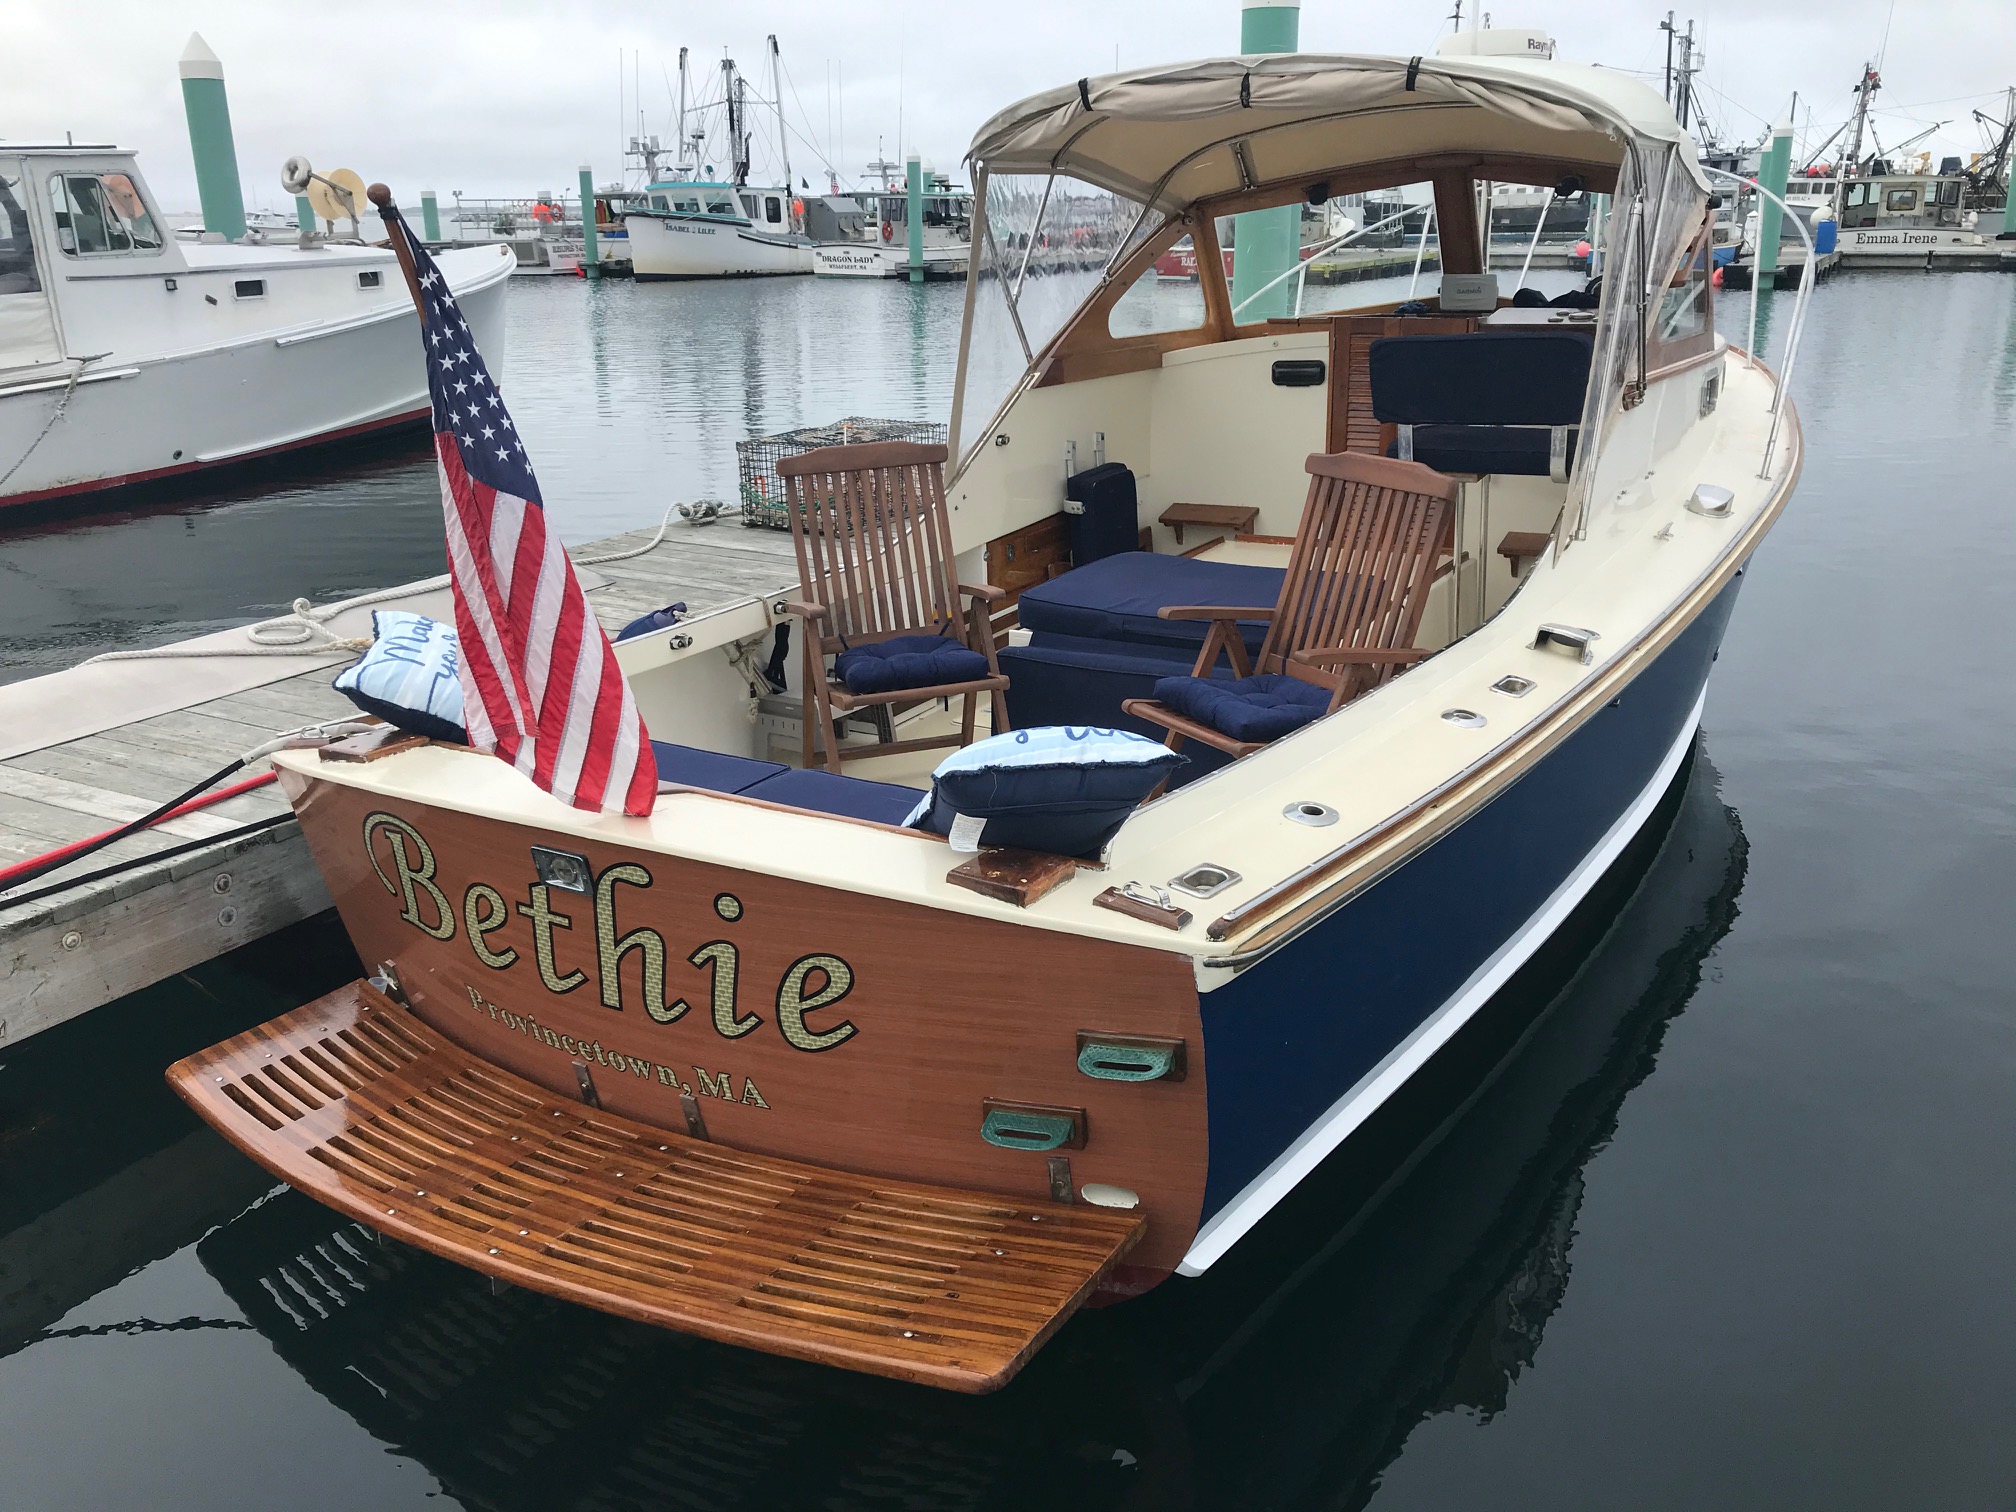 Bethie while docked at the marina in Provincetown Harbor